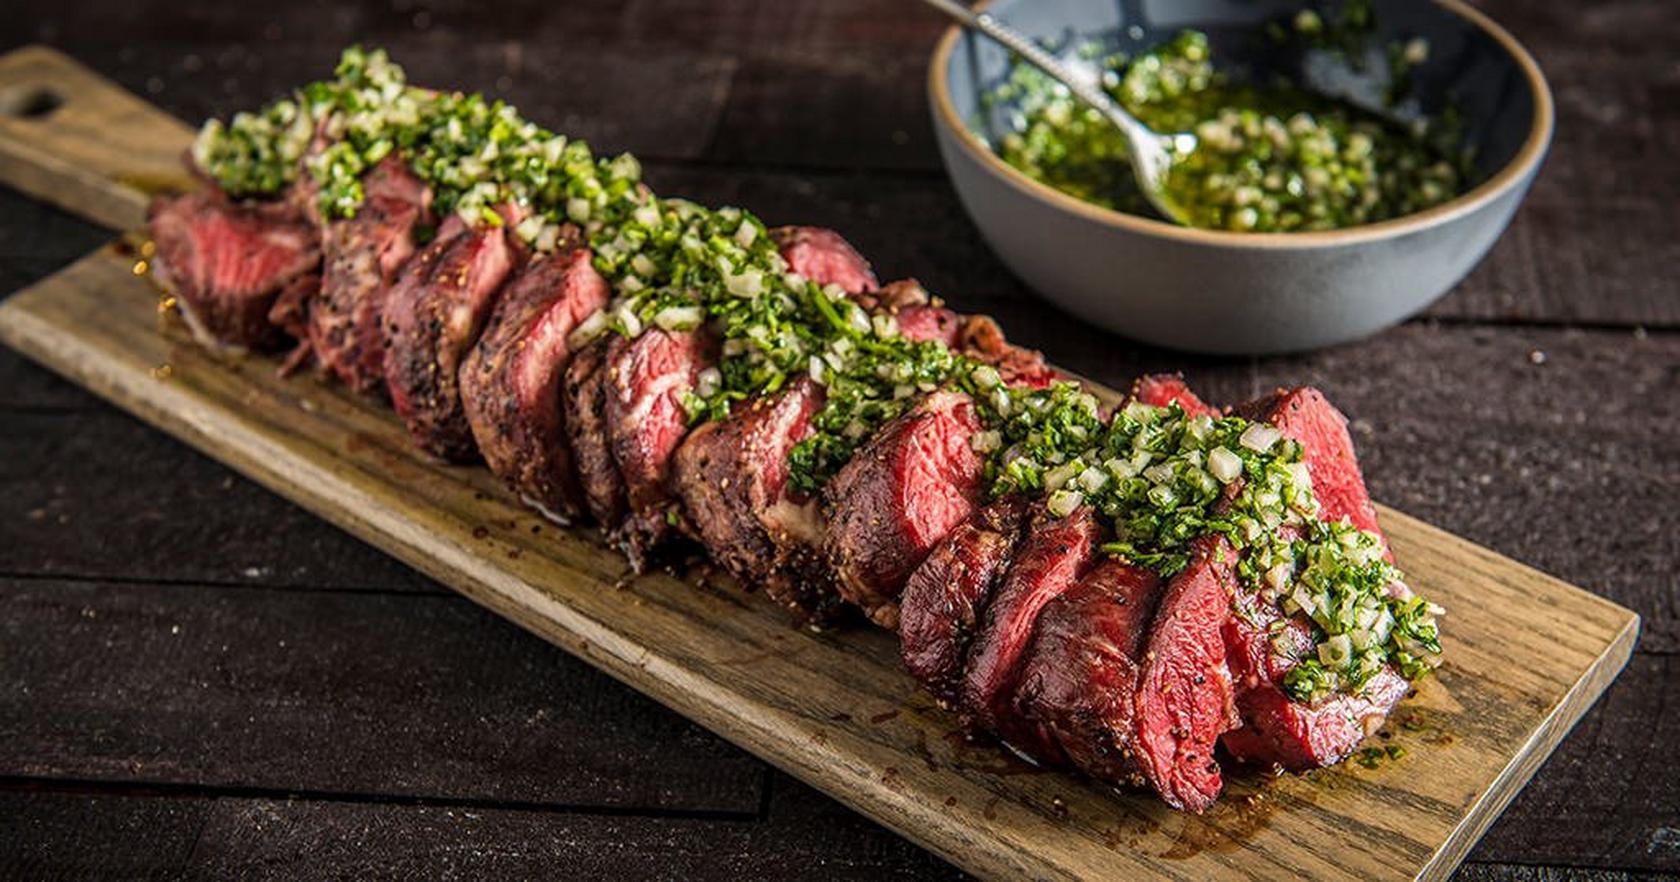 image of Roasted Beef Tenderloin With Gremolata